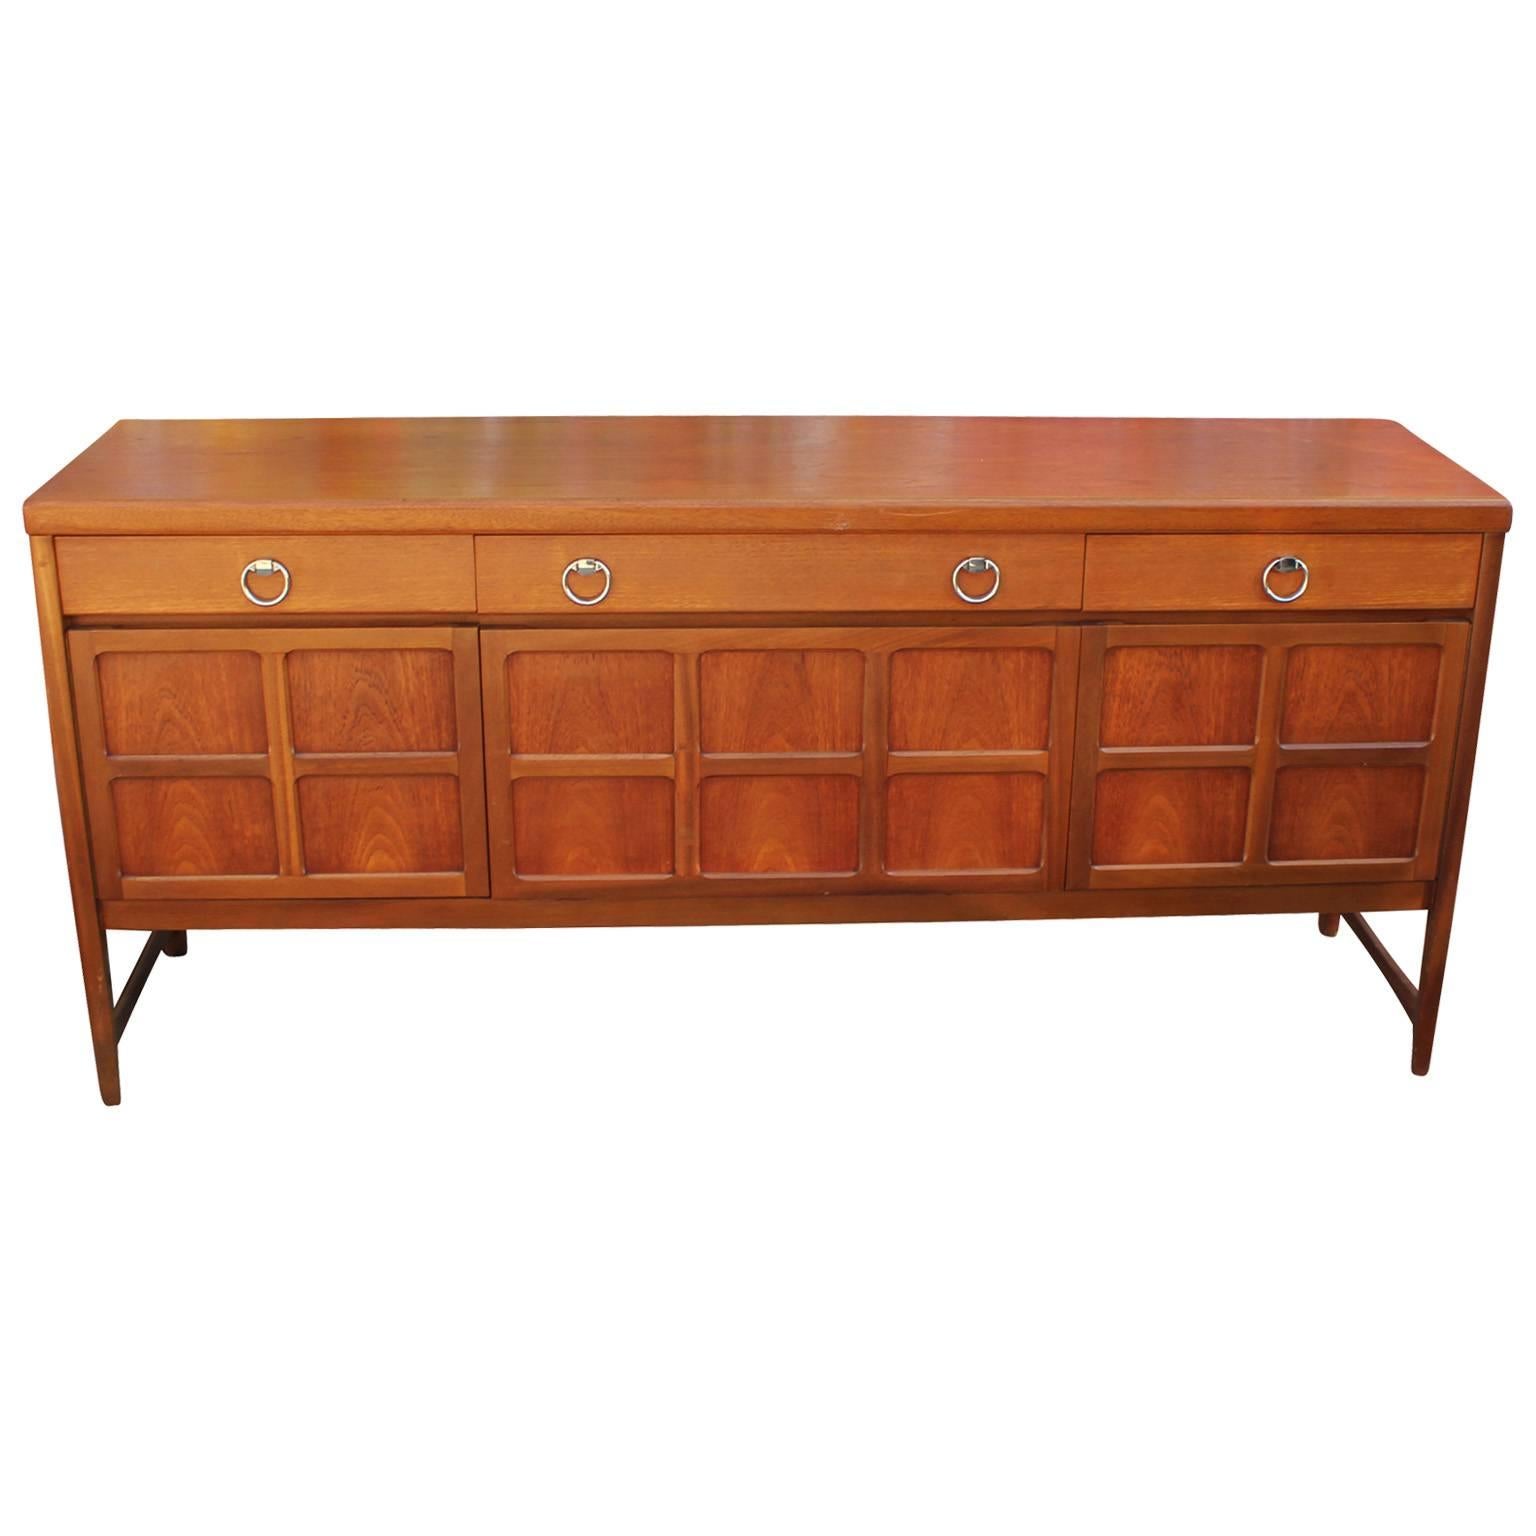 Wonderful sideboard or credenza with shiny chrome ring pulls. Sideboard is constructed of mahogany and teak. Front middle cabinet door drops down to reveal a single shelf. Right and left cabinet doors open to a single shelf. Three drawers provide